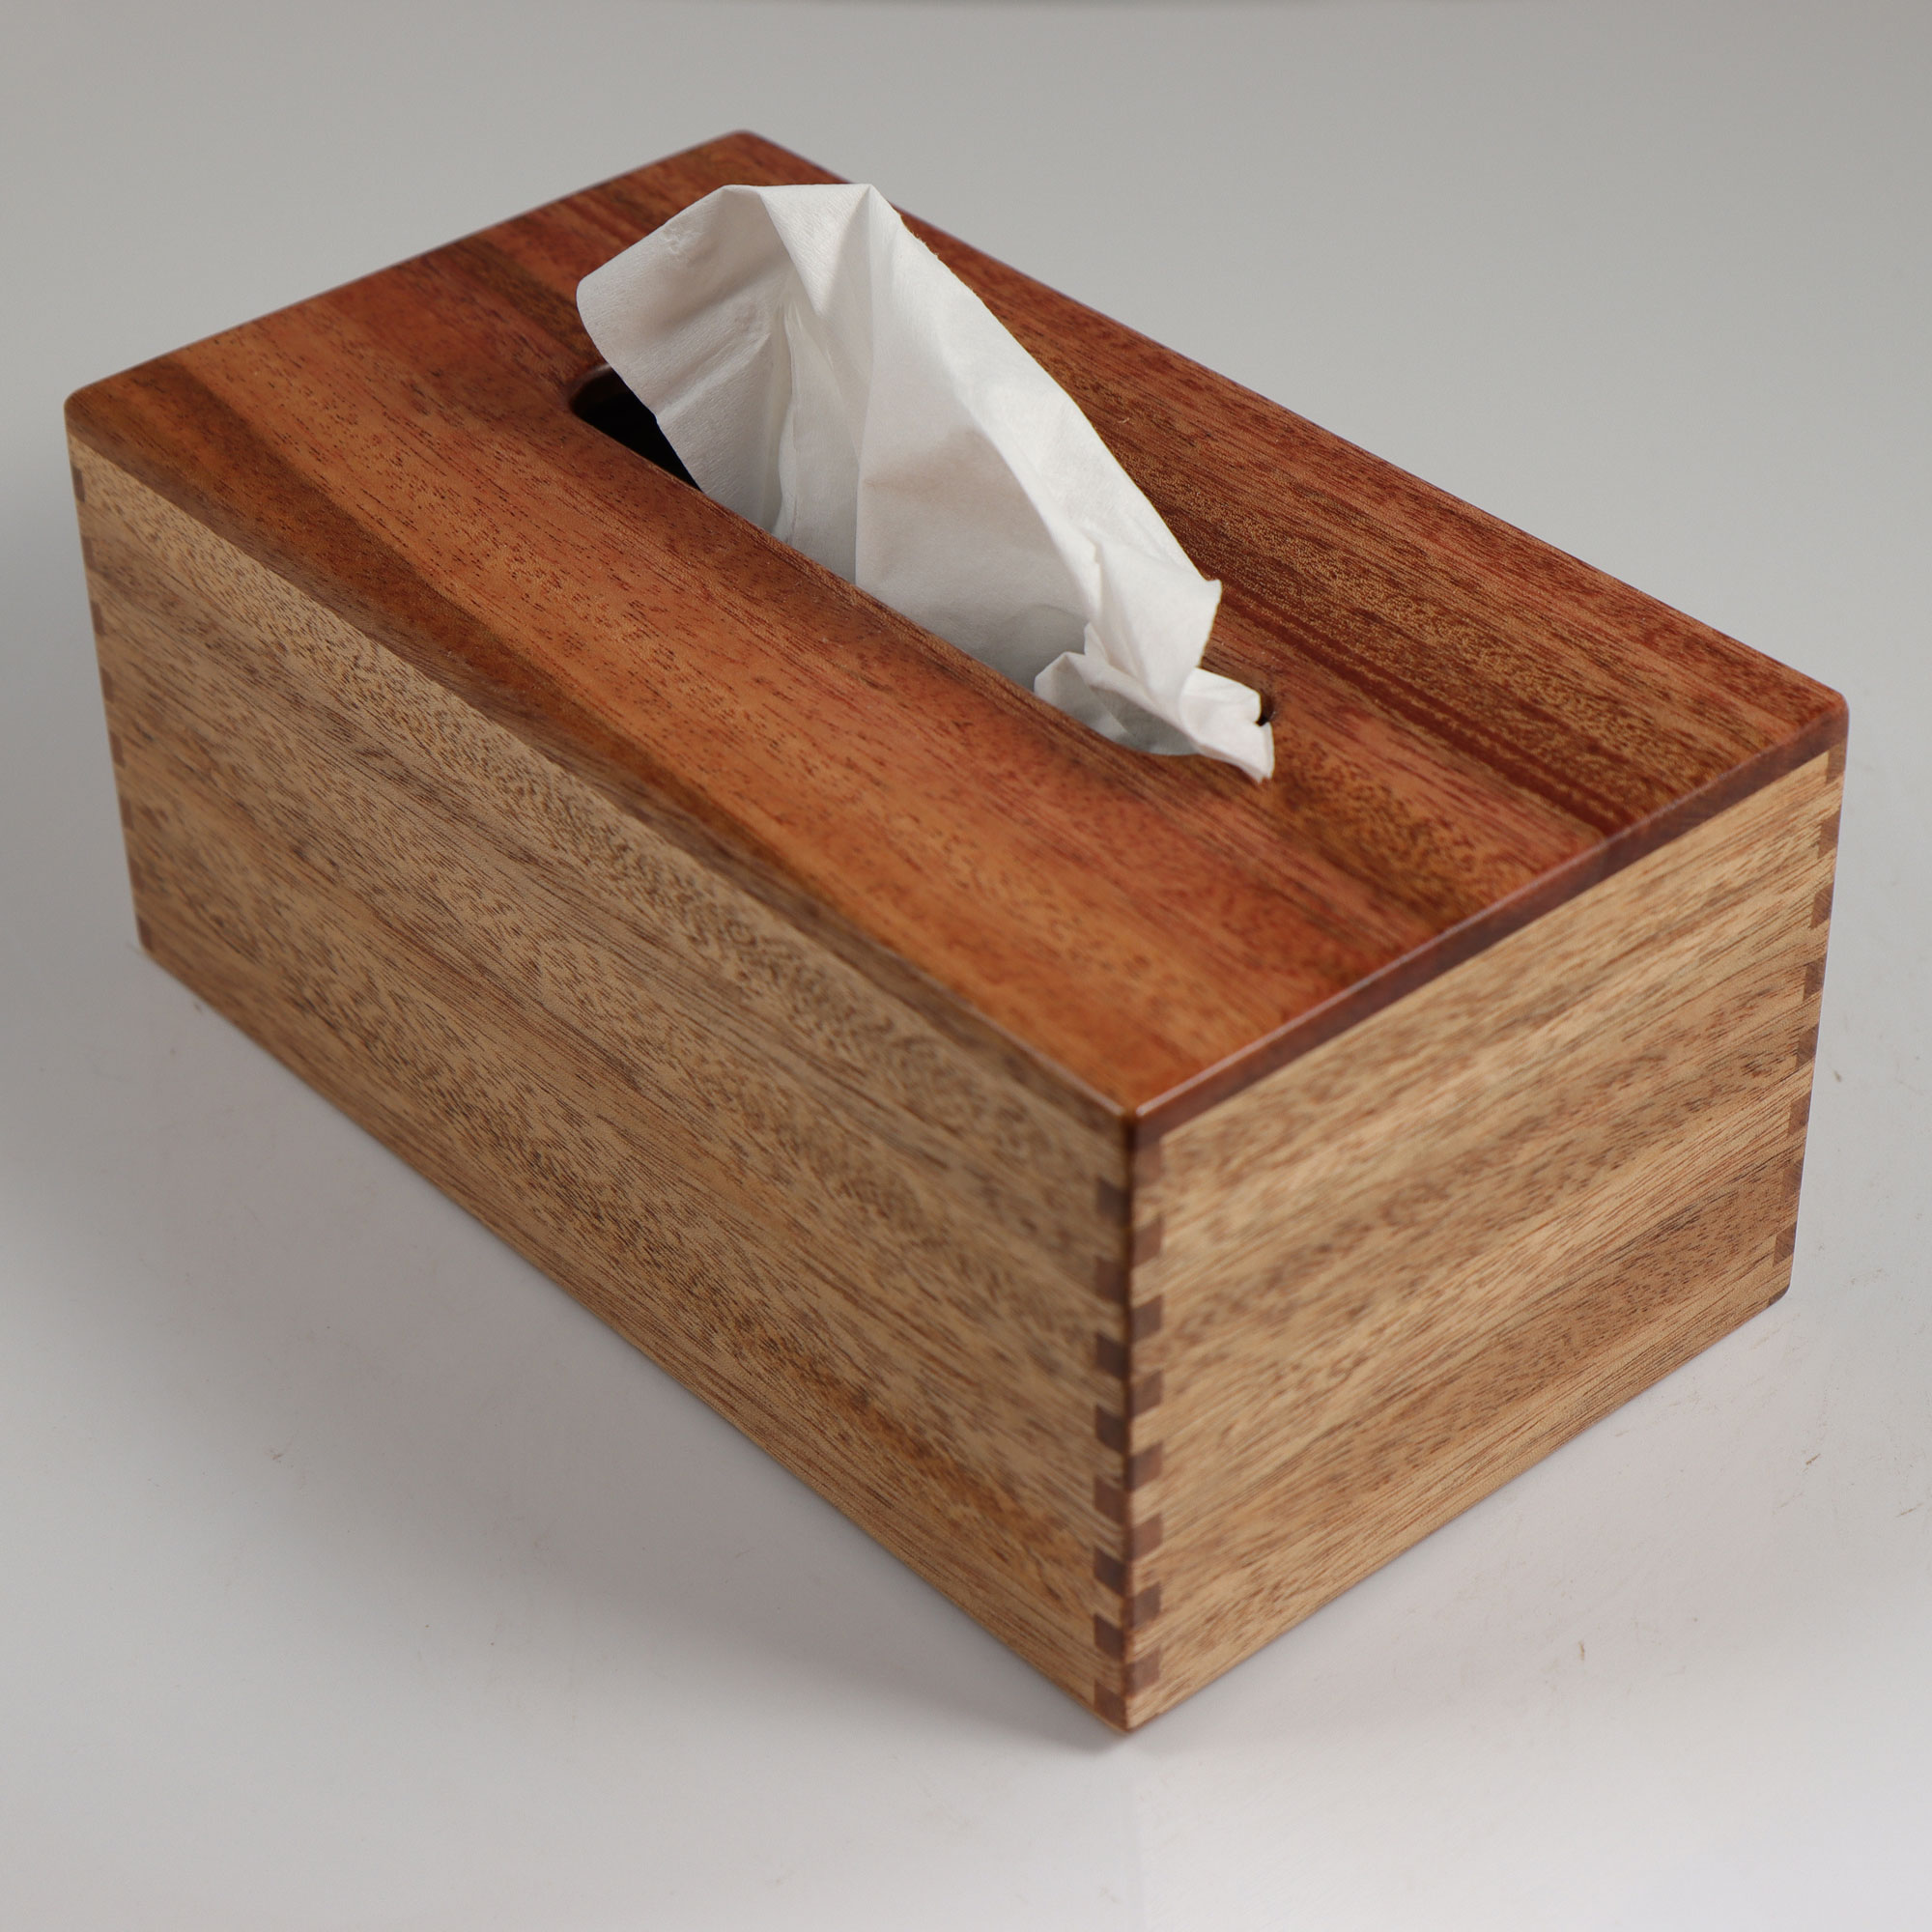 Solid Texas Black Walnut - Handmade Tissue / Kleenex Box Cover Holder -  Square Cube Style - Box Jointed Sides - Oak Knoll Woodworks